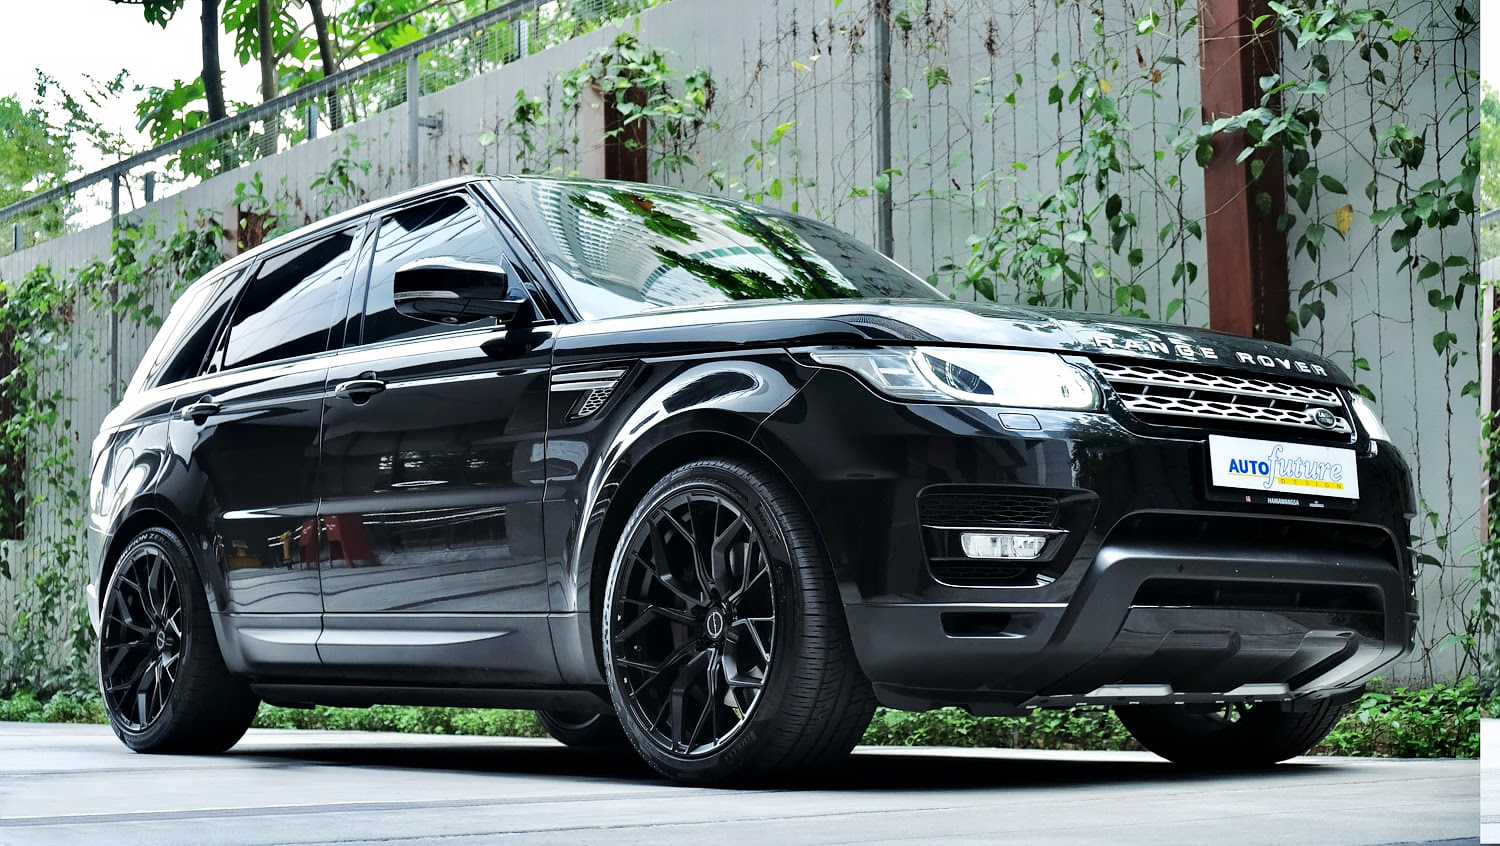 Land Rover Range Rover Sport Wheels | Custom Rim and Tire Packages